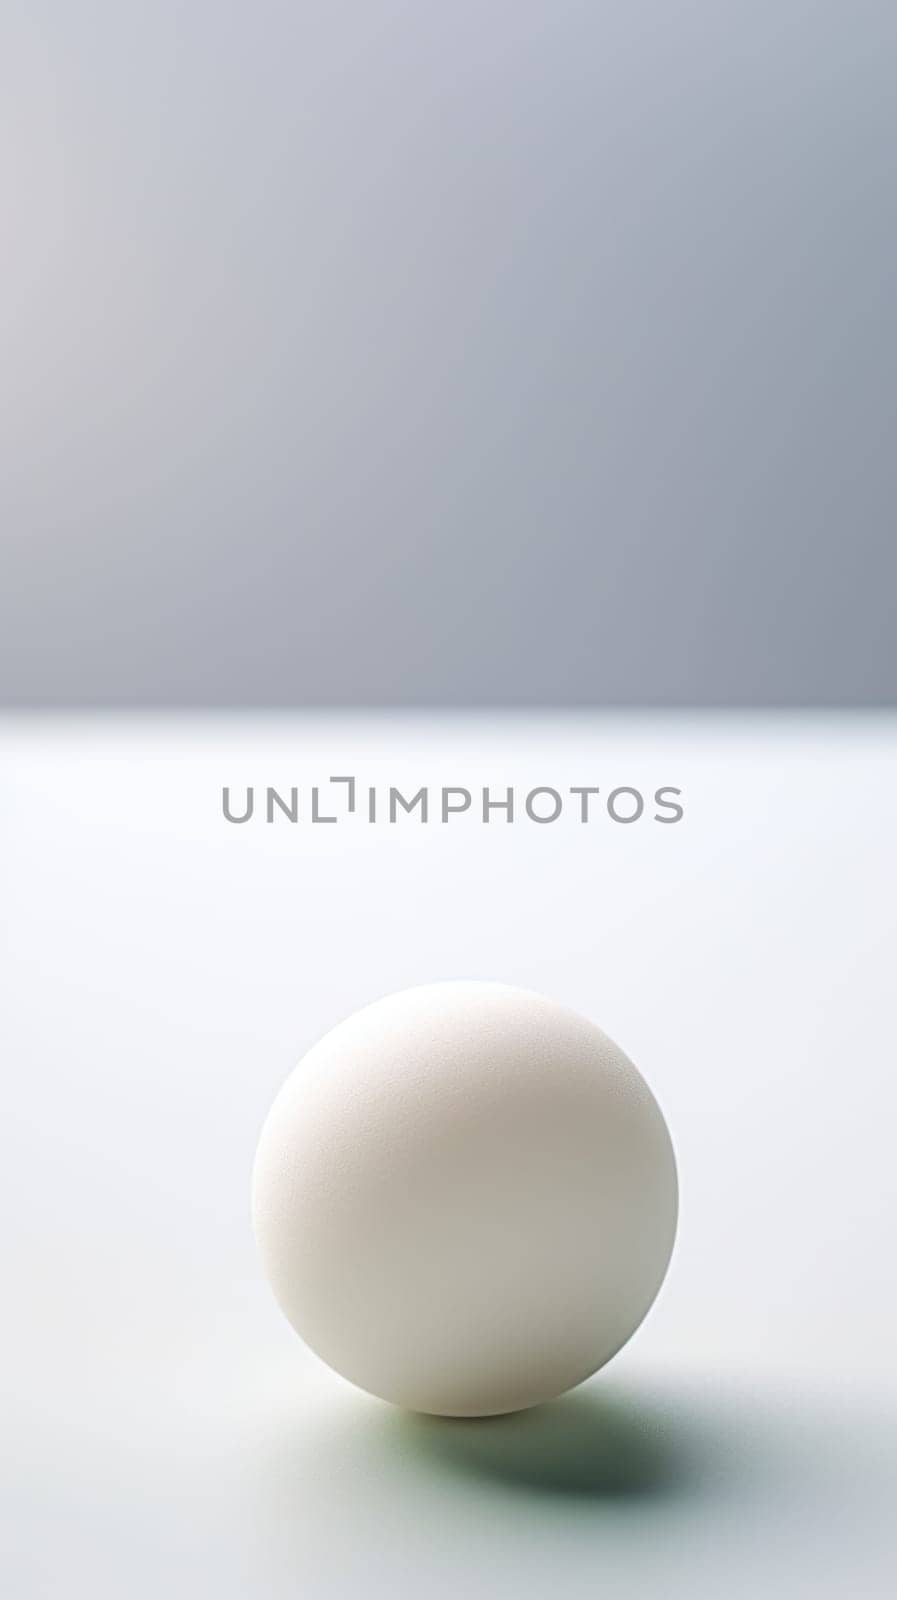 A ping pong ball sitting on a table with a white background